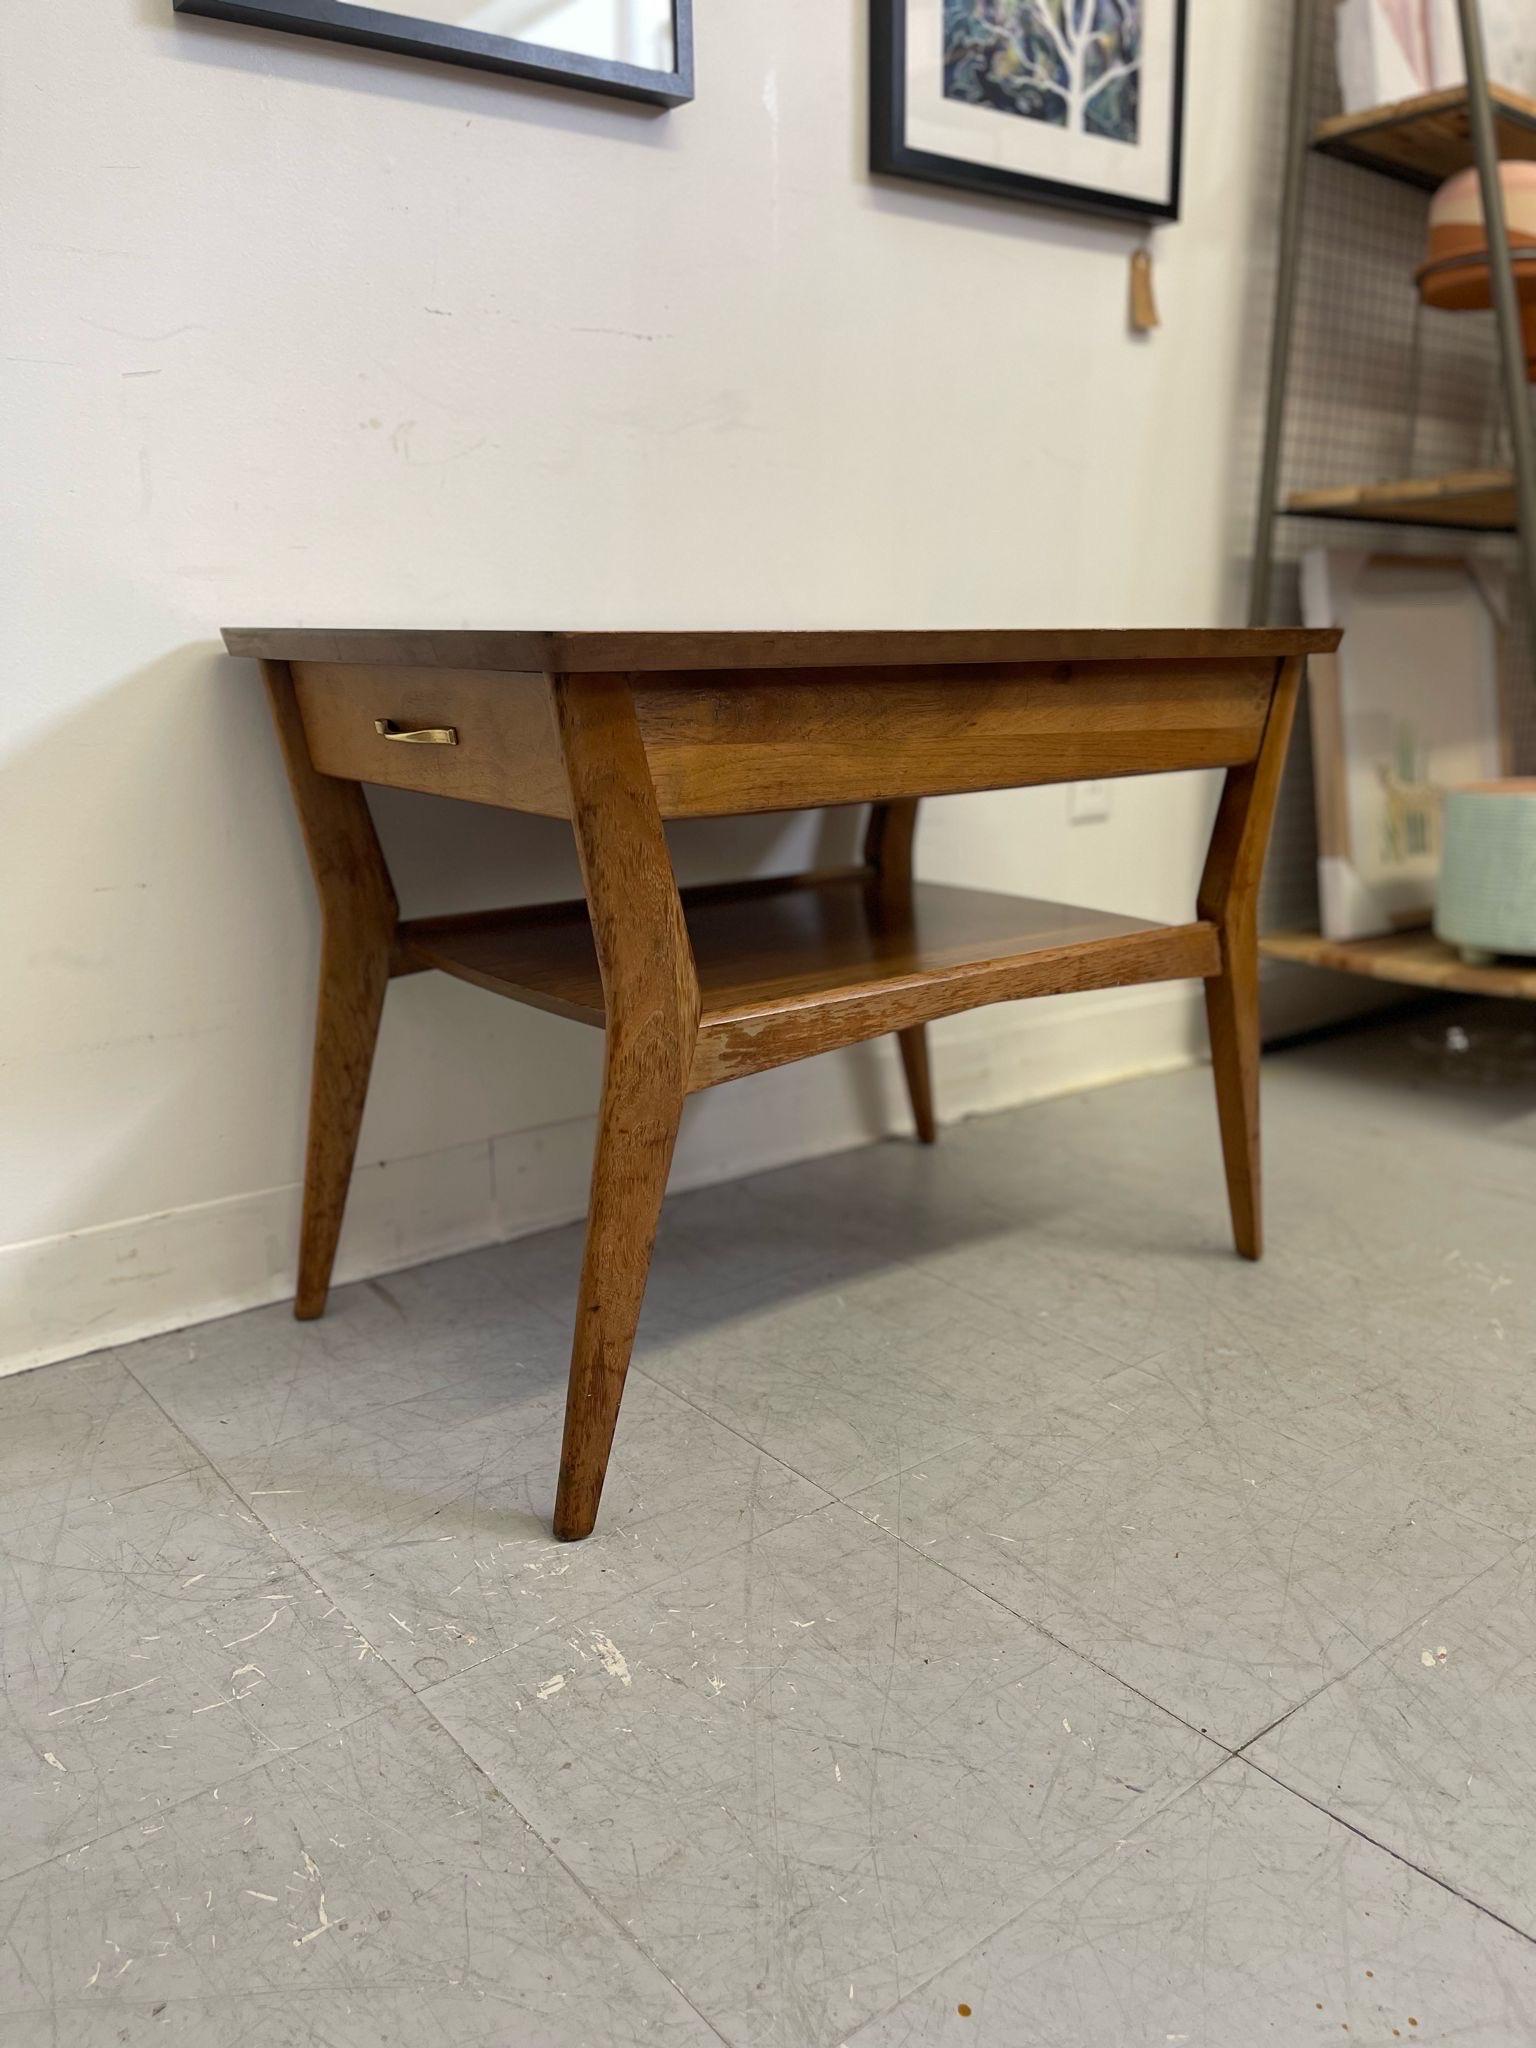 This End Table has an atomic shape to the legs, Classic 1960s design. Single Dovetailed drawer with makers mark inside. Cool wood grain, honey walnut tone. Vintage Condition Consistent with Age as Pictured.

Dimensions. 31 W ; 19 D ; 22 H